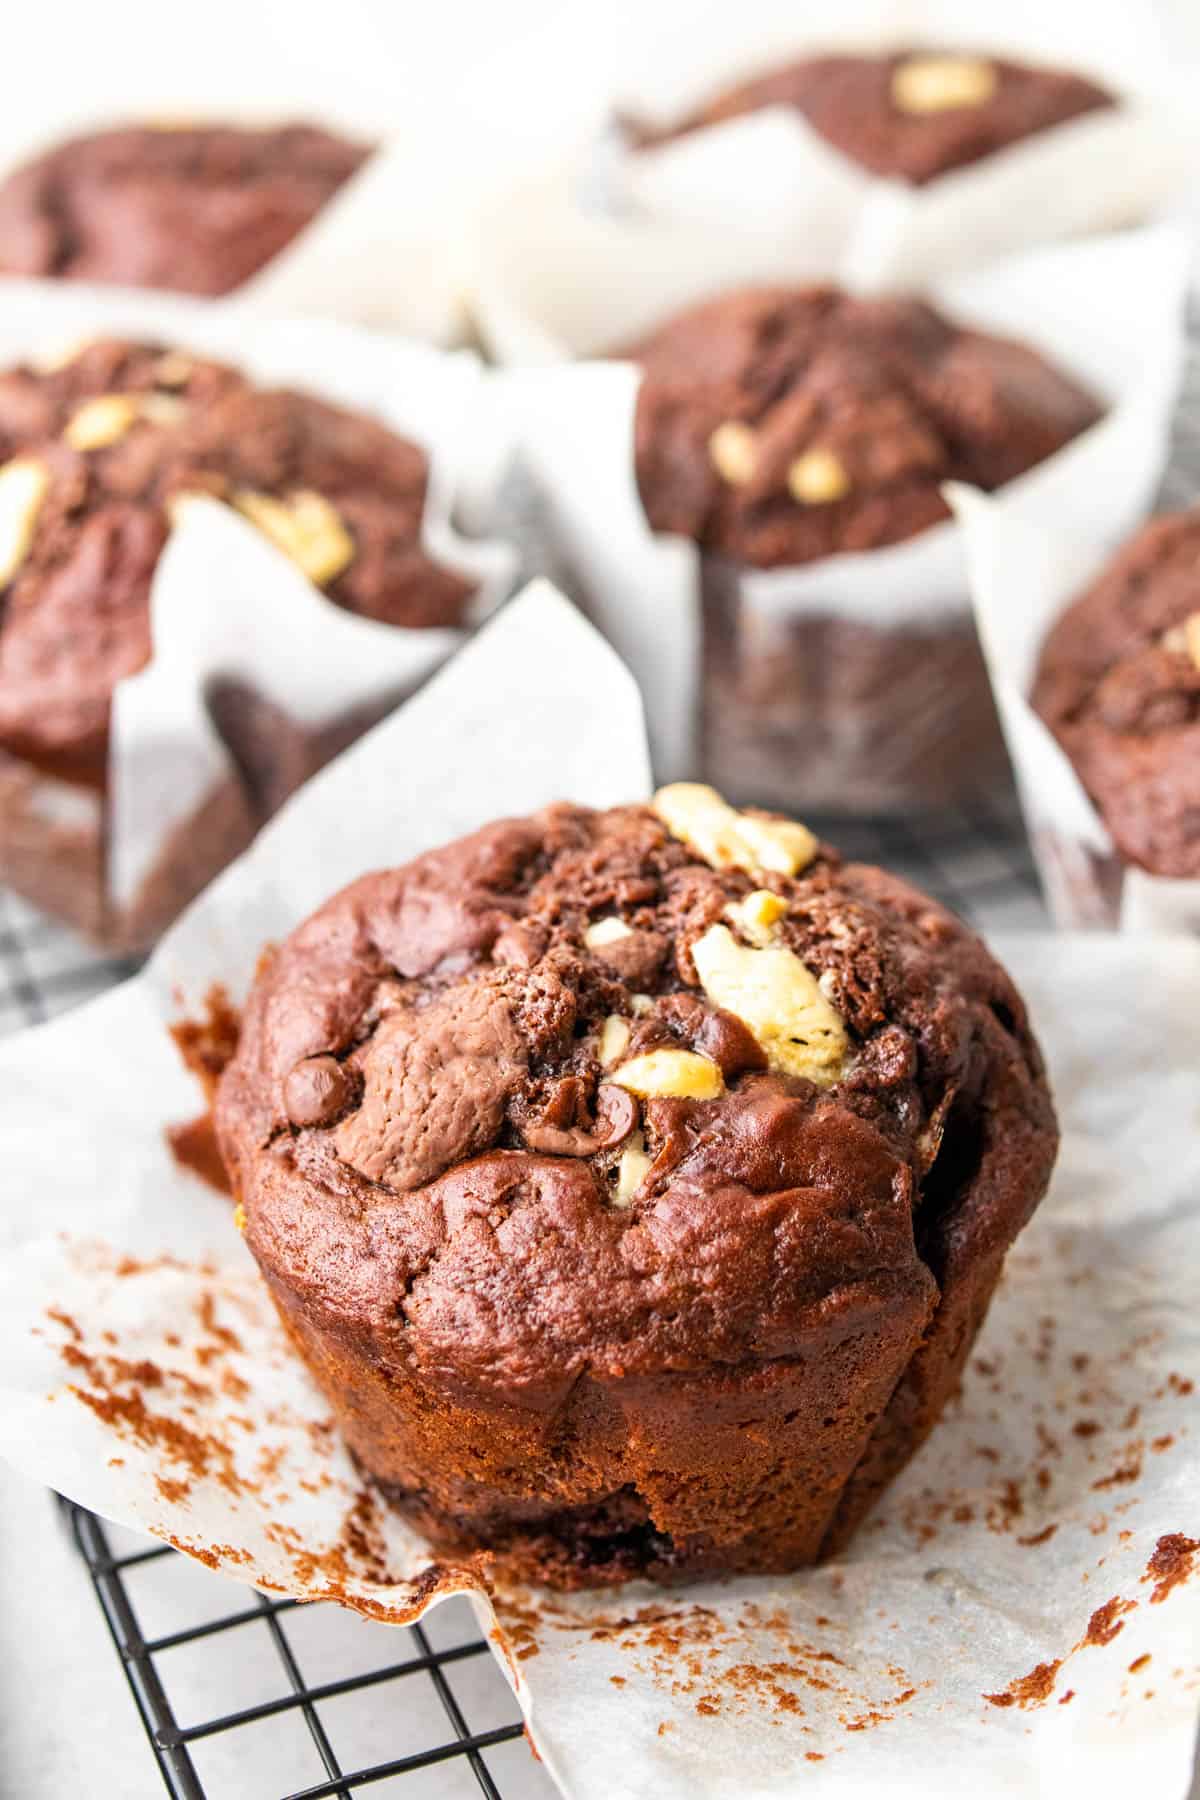 unwrapped chocolate muffin on its wrapper surrounded by other muffins